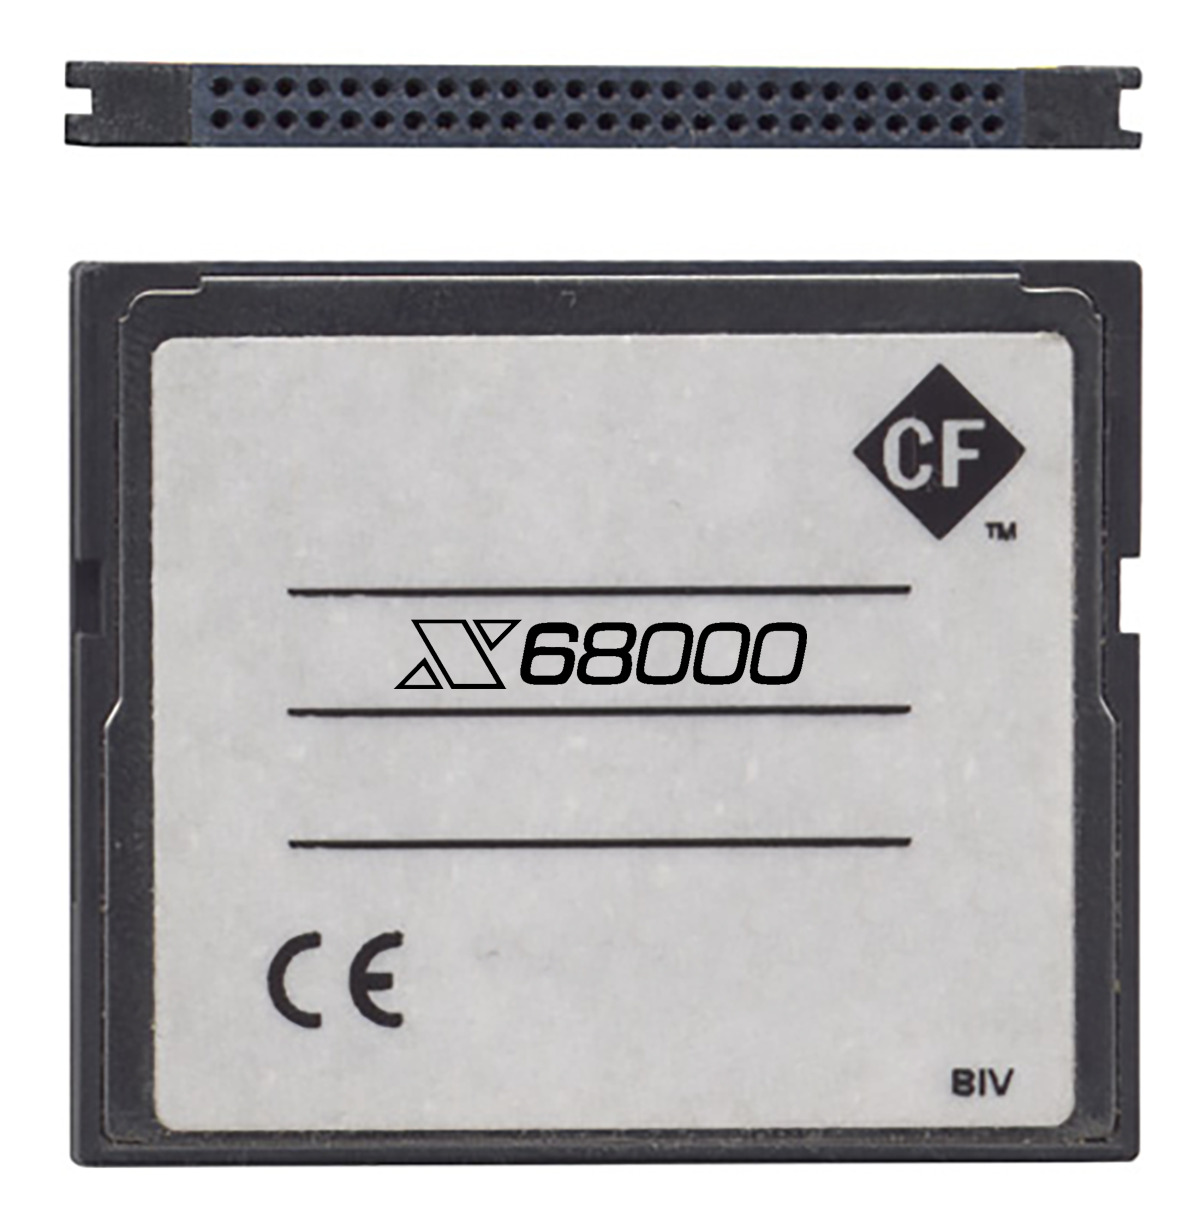 Hard Disk Image CF Card for Sharp X68000 AztecMonster Adapter Compact Flash